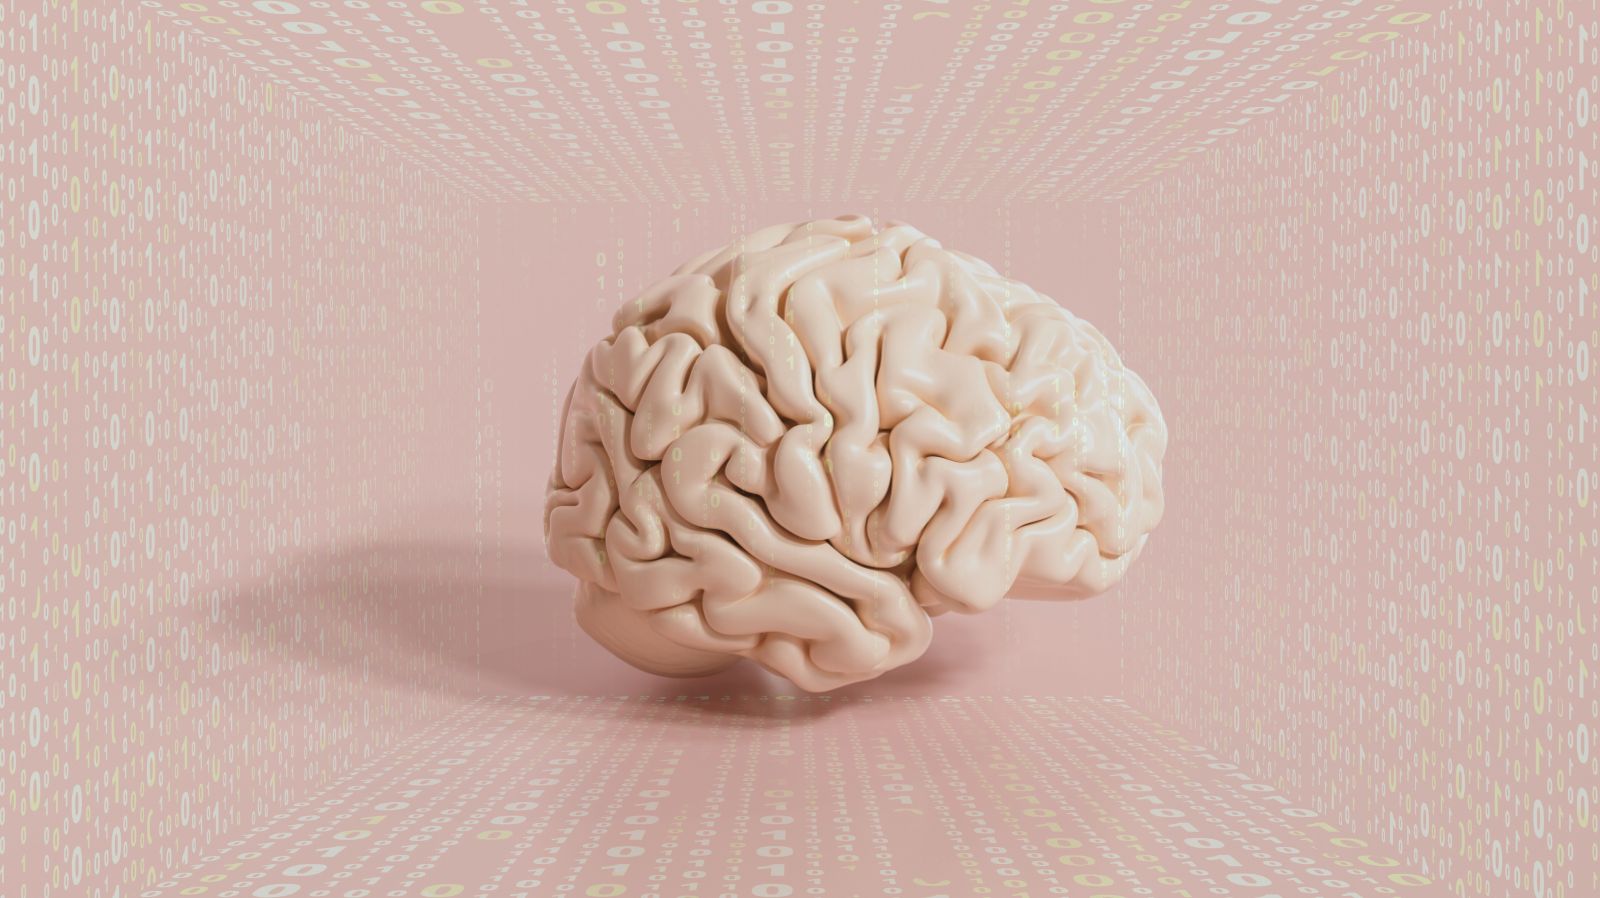 GPT AI Enables Scientists to Passively Decode Thoughts in